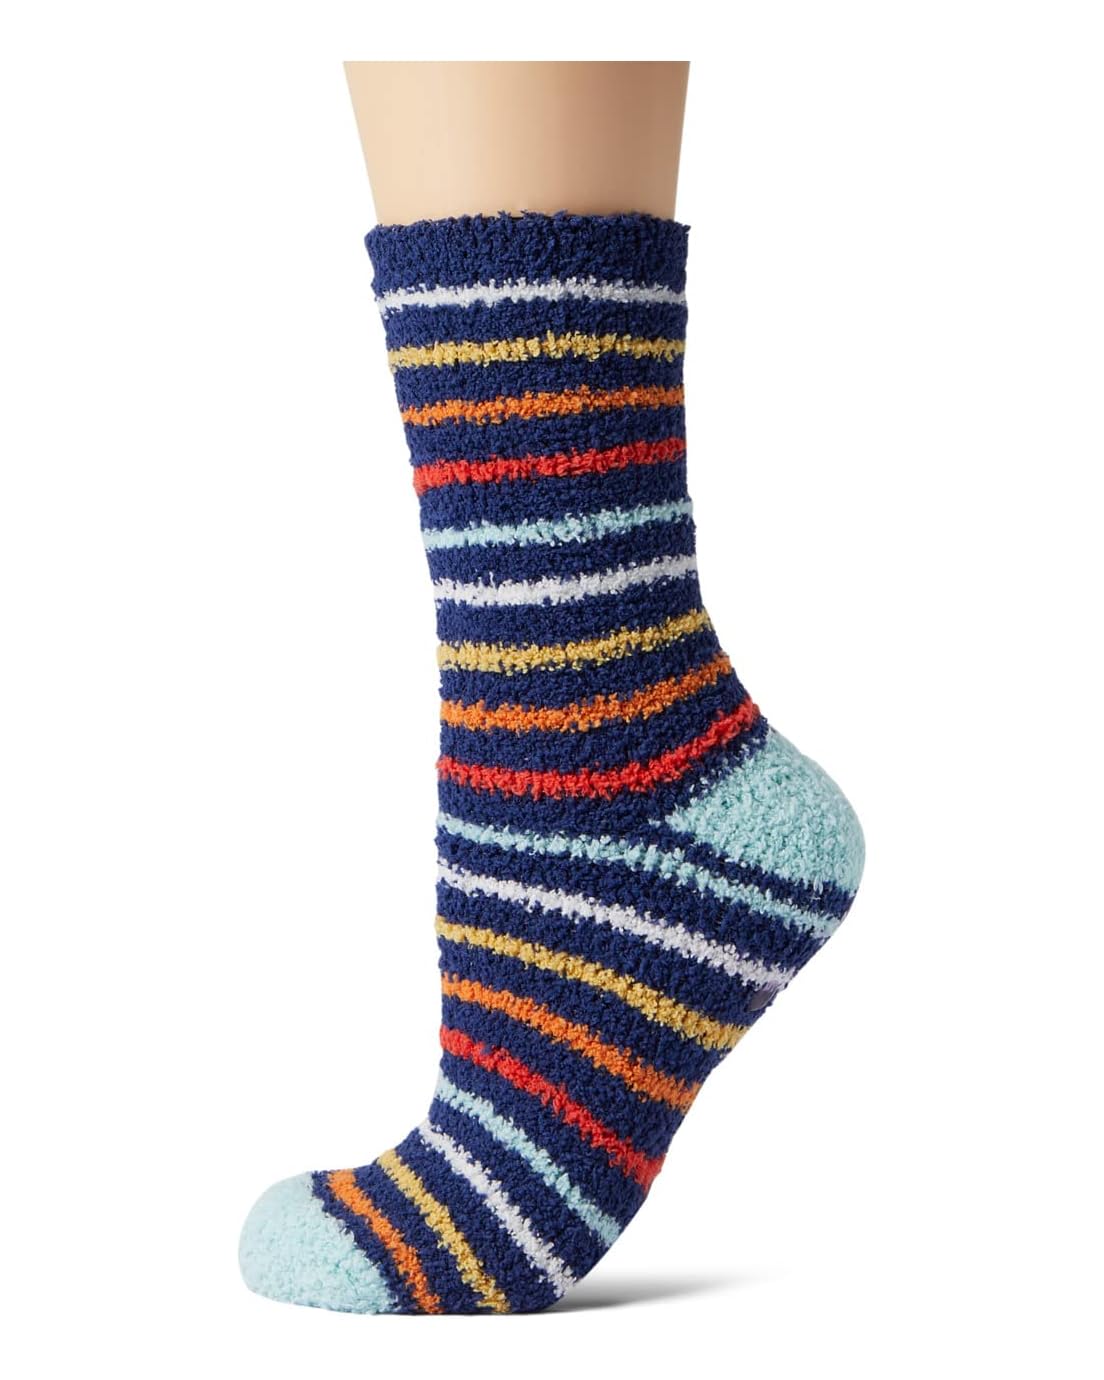 P.J. Salvage Patterned Cozy Socks with Grippers